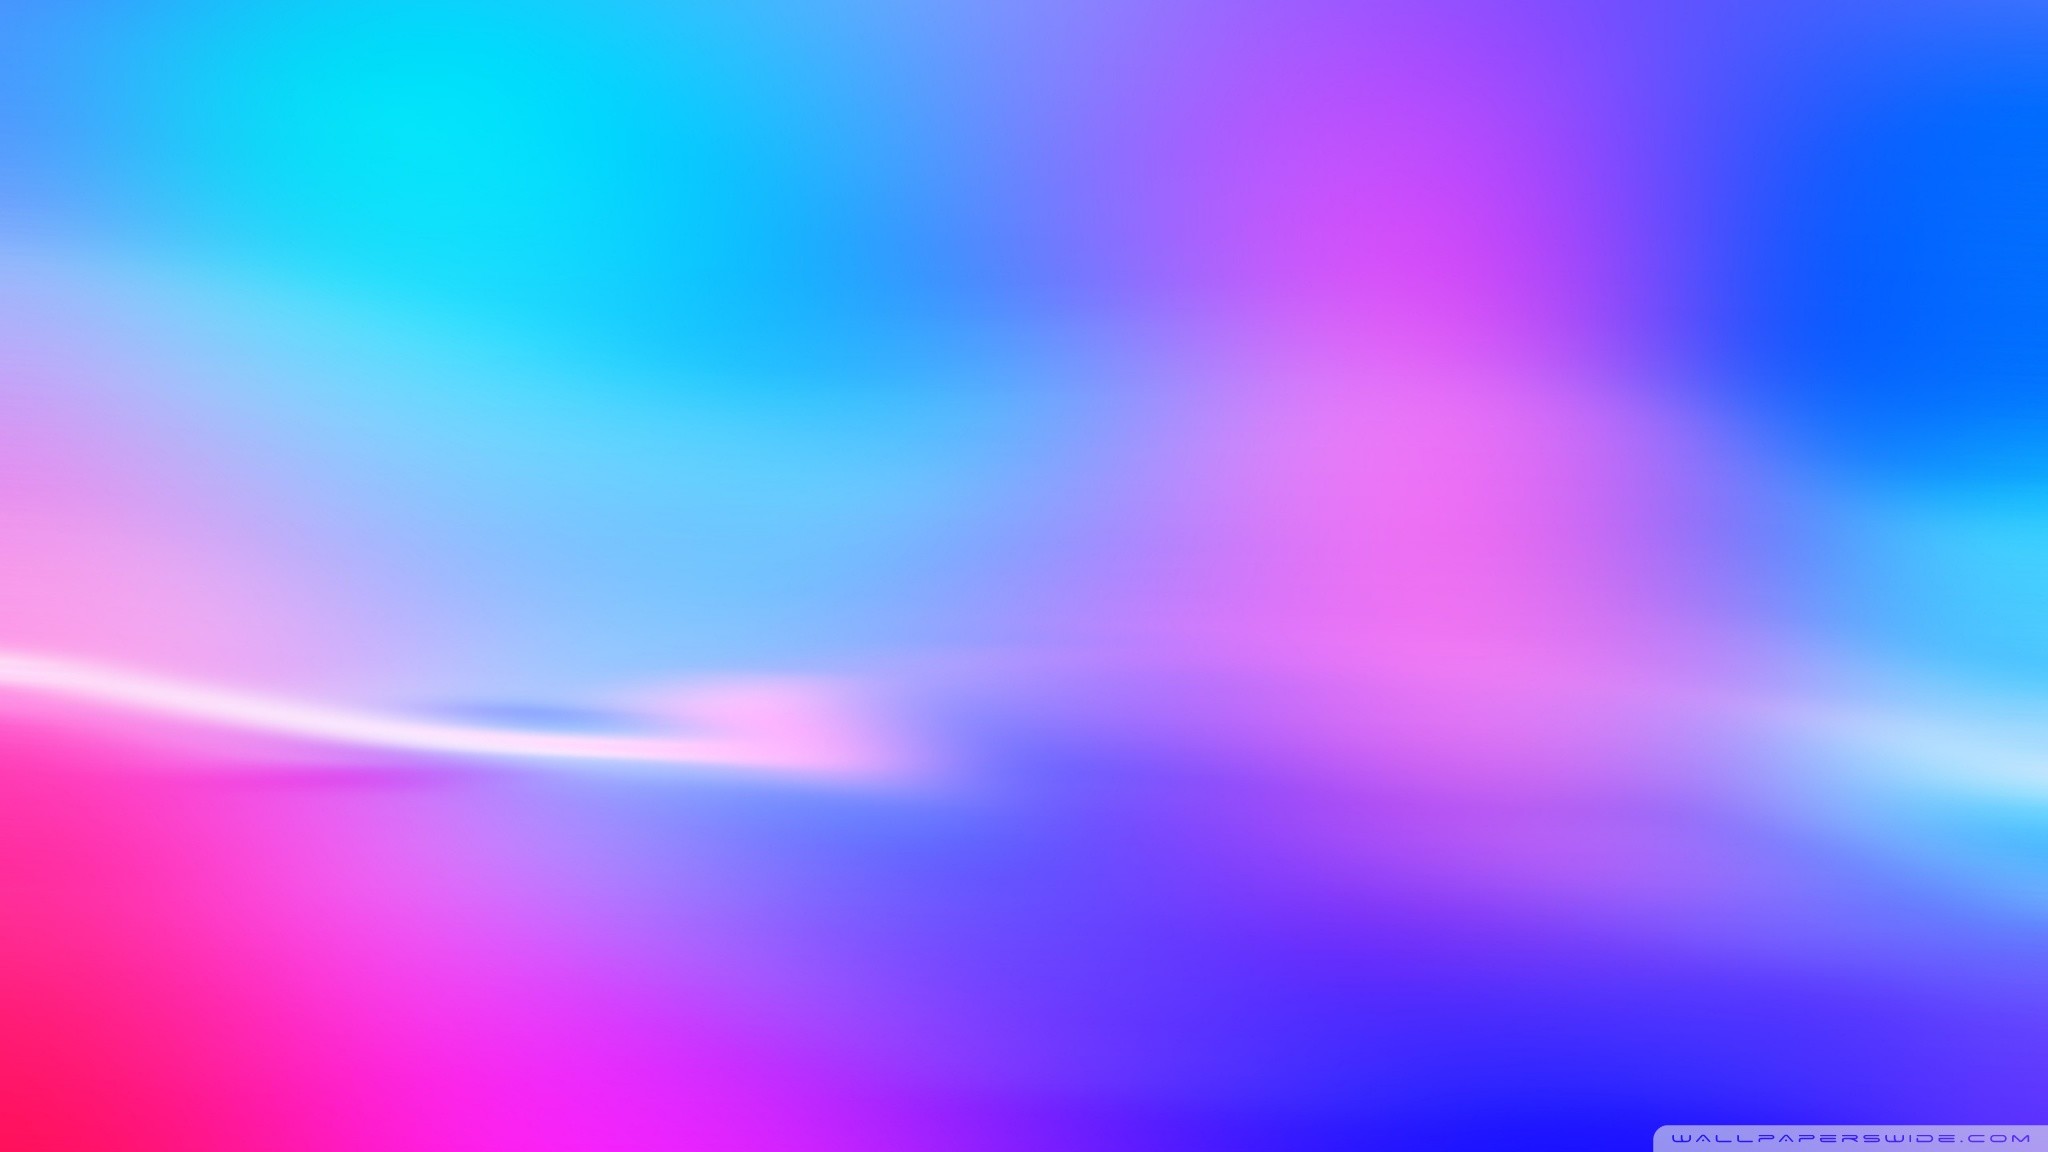 Download wallpaper 2560x1440 gradient blur abstraction light colorful  widescreen 169 hd background